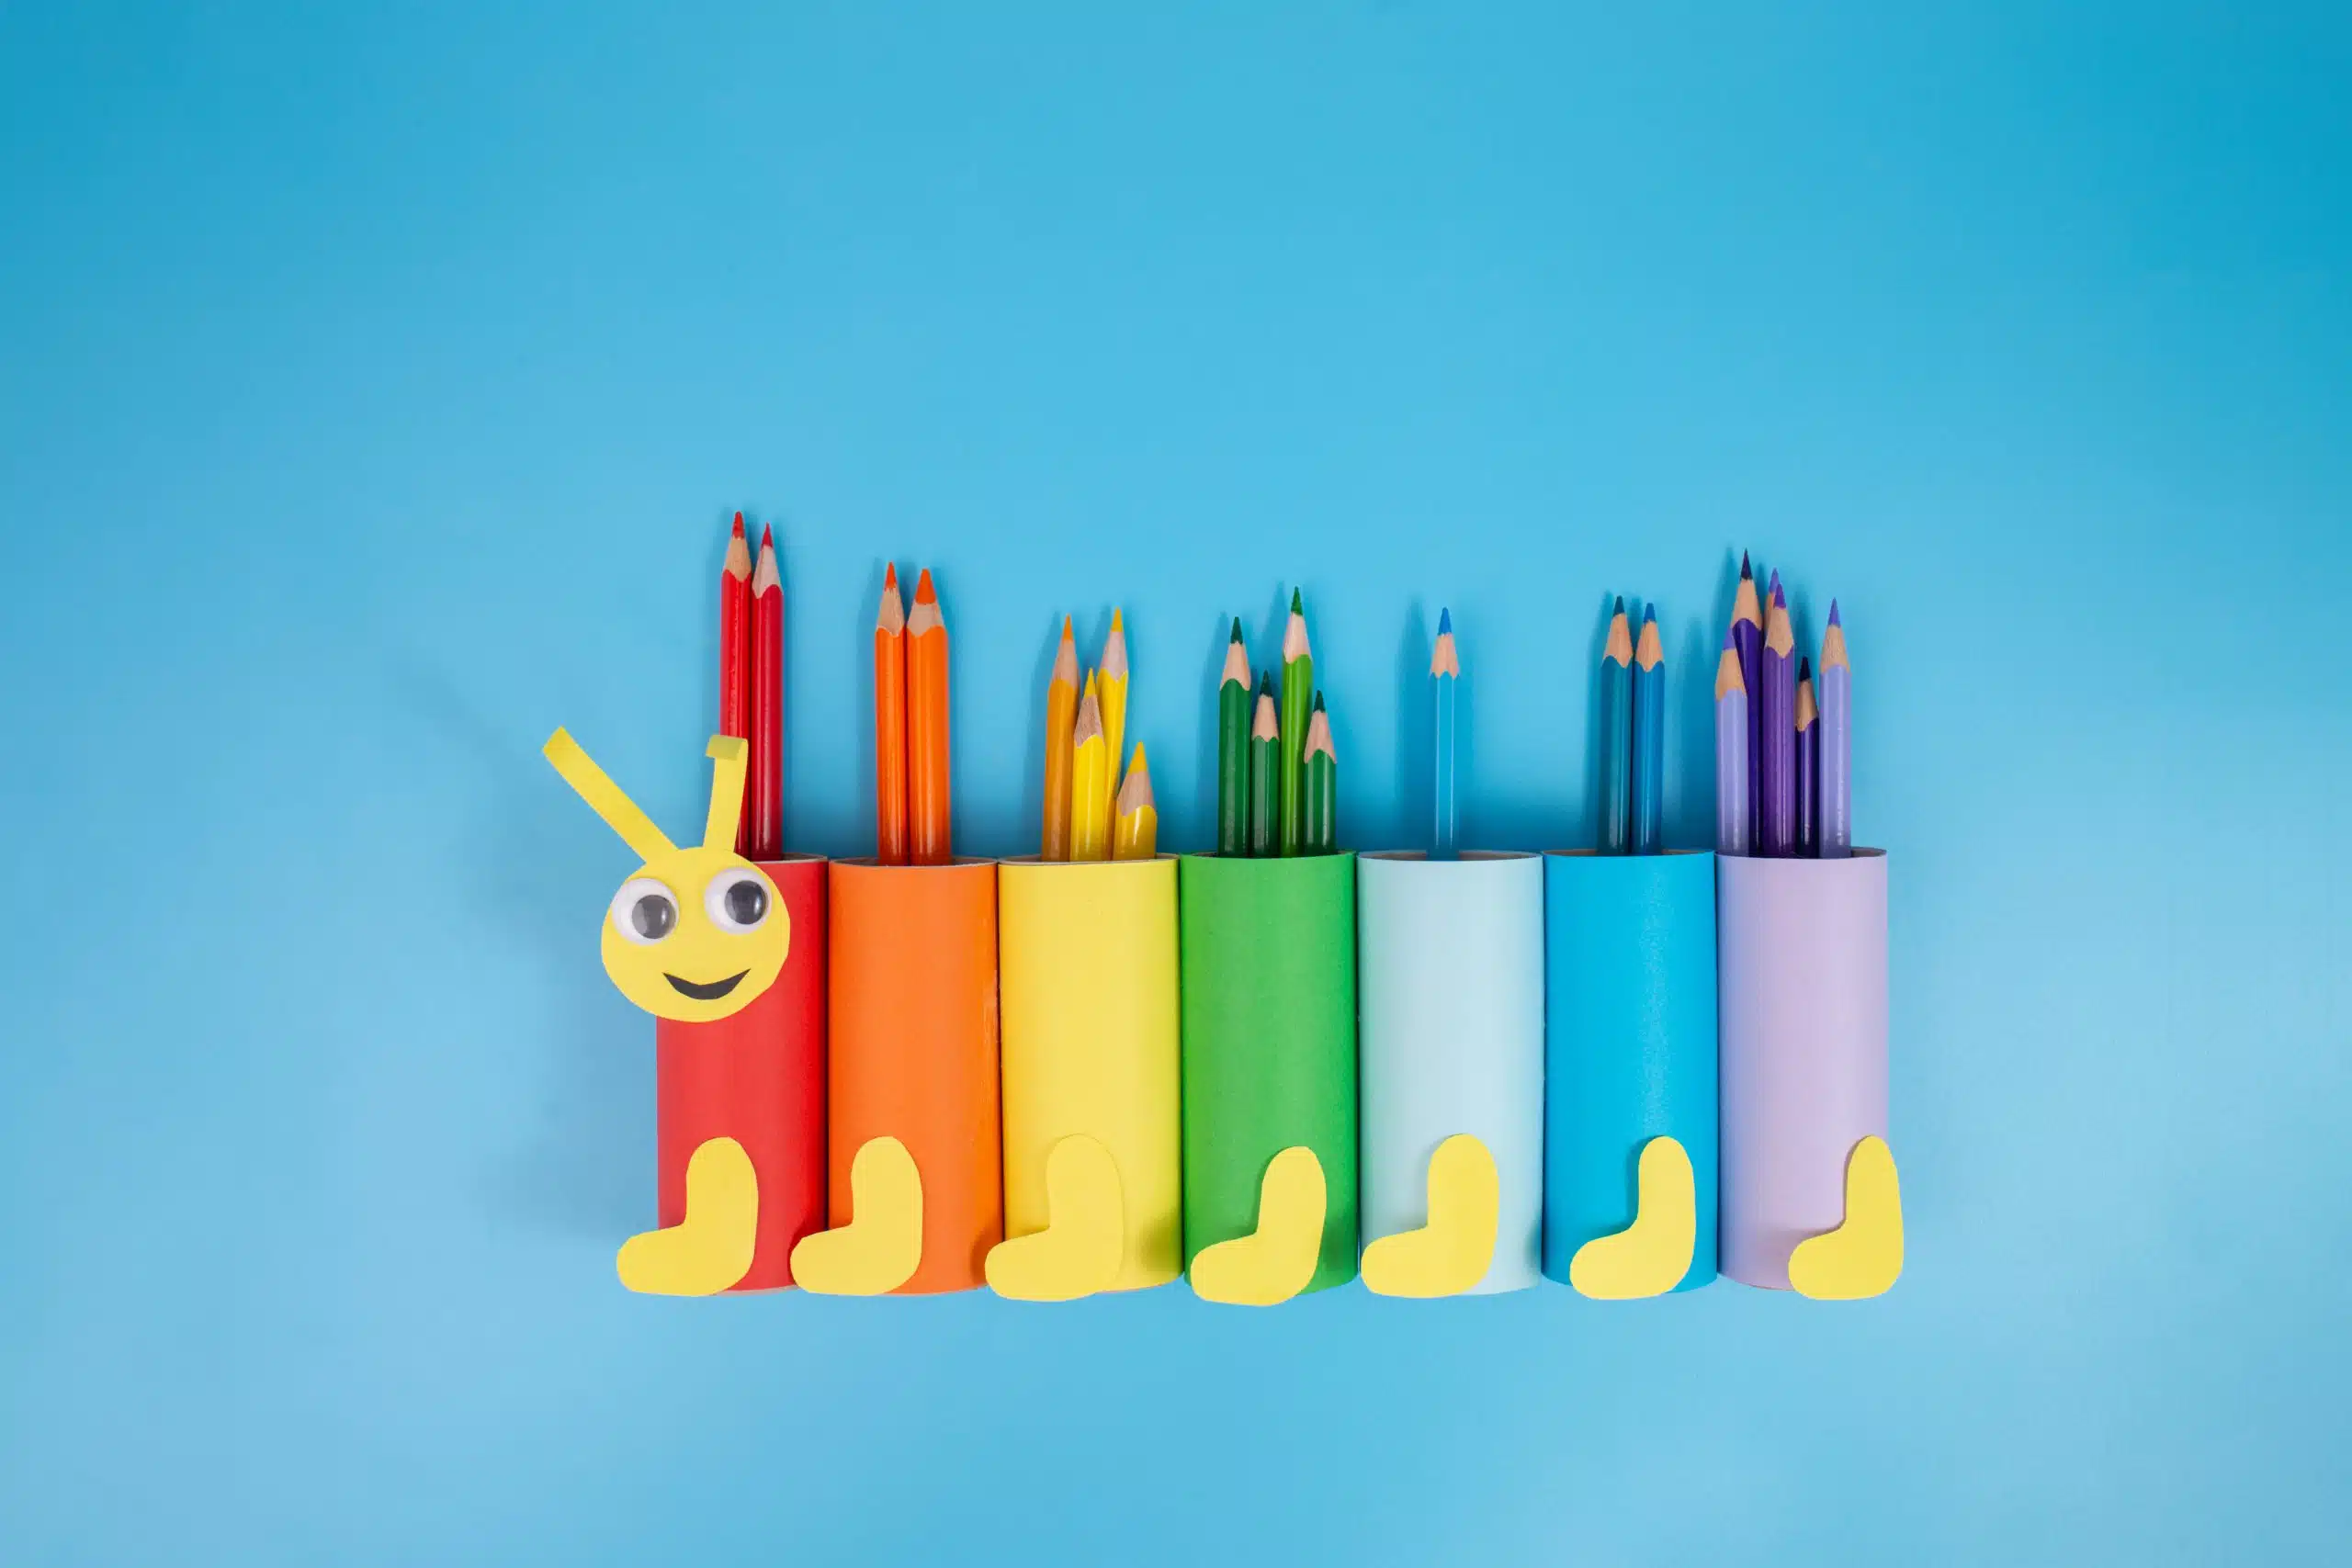 simple activity for kids, toilet paper roll craft, rainbow caterpillar figurine holder for pencils, reuse and recycled material concept